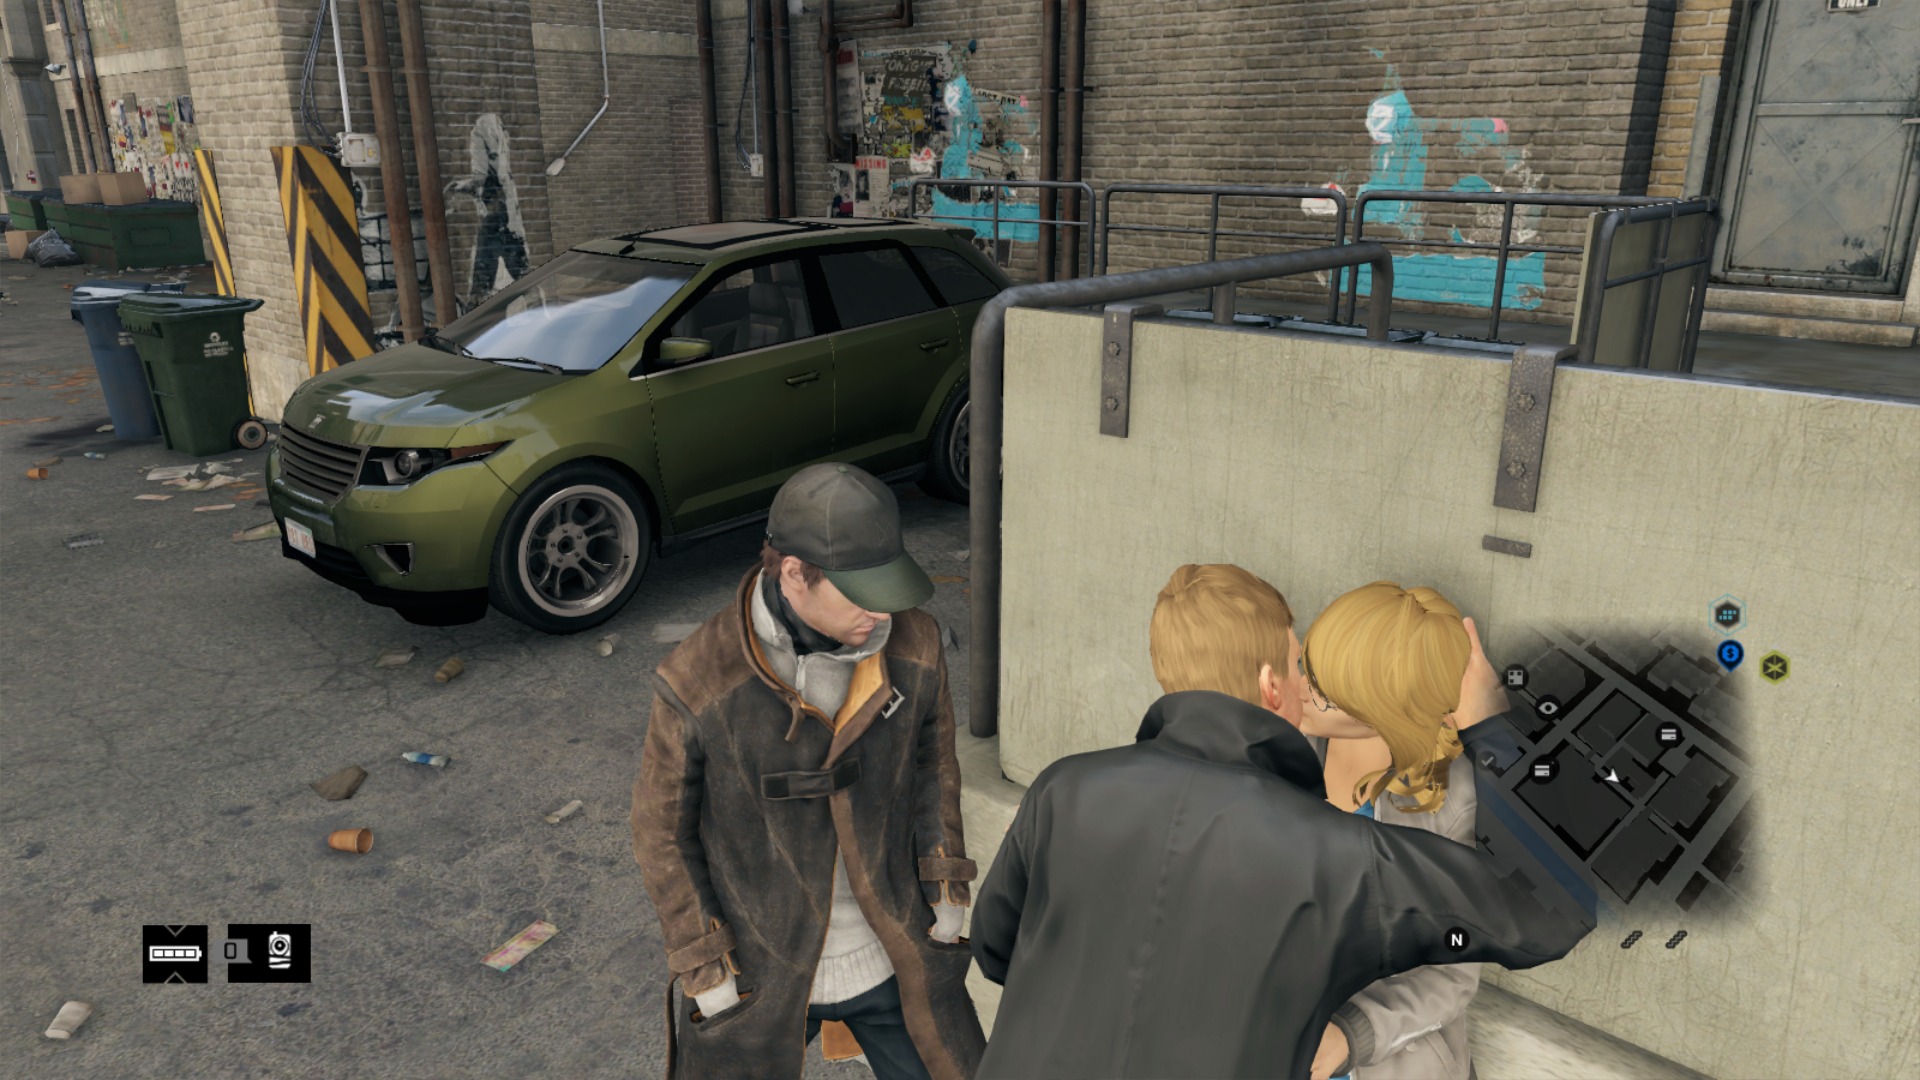 WATCH_DOGS™_20140528112659